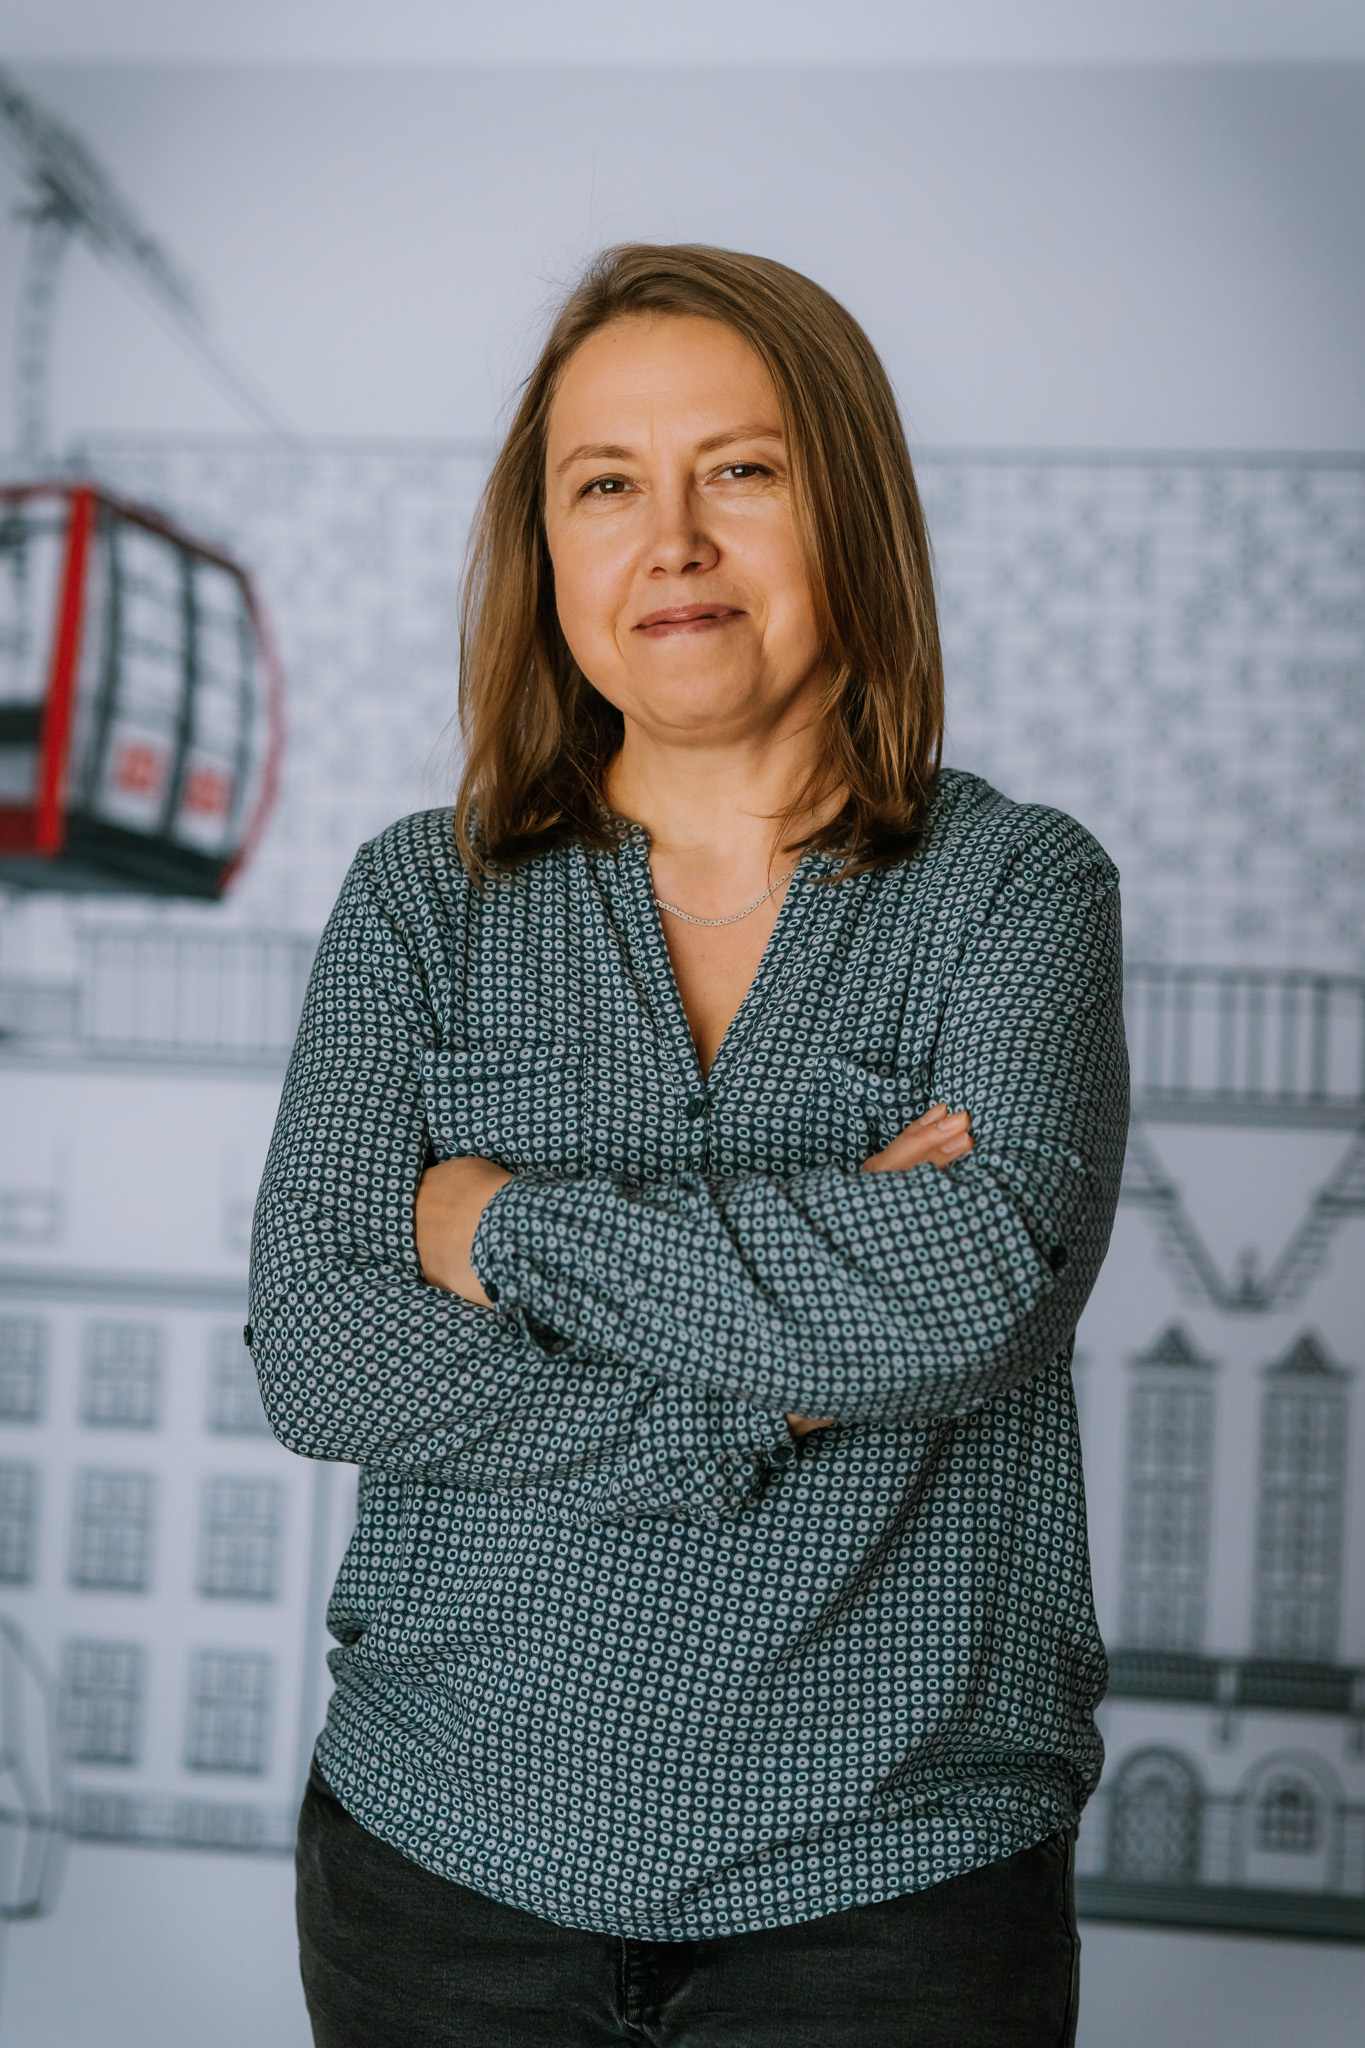 A woman stands with her arms folded in front of her and smiles in a friendly manner. She has light, straight, medium-length hair. In the background: a drawing of the main building of Wrocław University of Science and Technology with a red Polinka cable car.